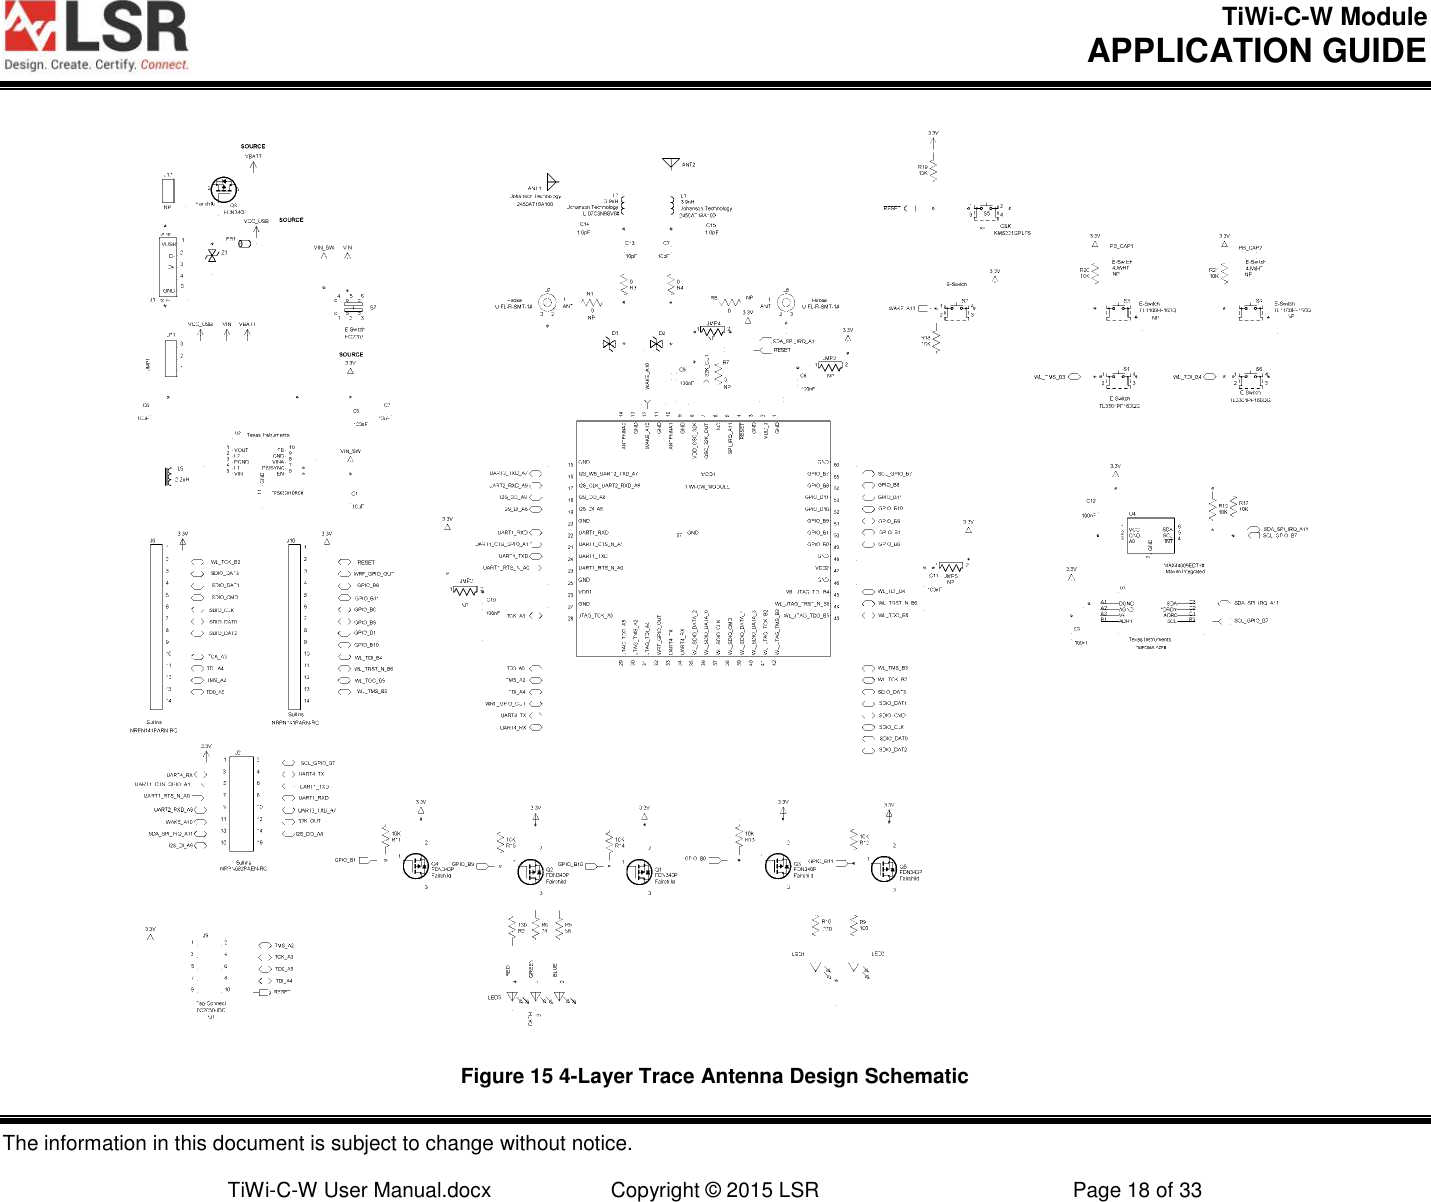 TiWi-C-W Module       APPLICATION GUIDE  The information in this document is subject to change without notice.  TiWi-C-W User Manual.docx  Copyright © 2015 LSR  Page 18 of 33  Figure 15 4-Layer Trace Antenna Design Schematic 